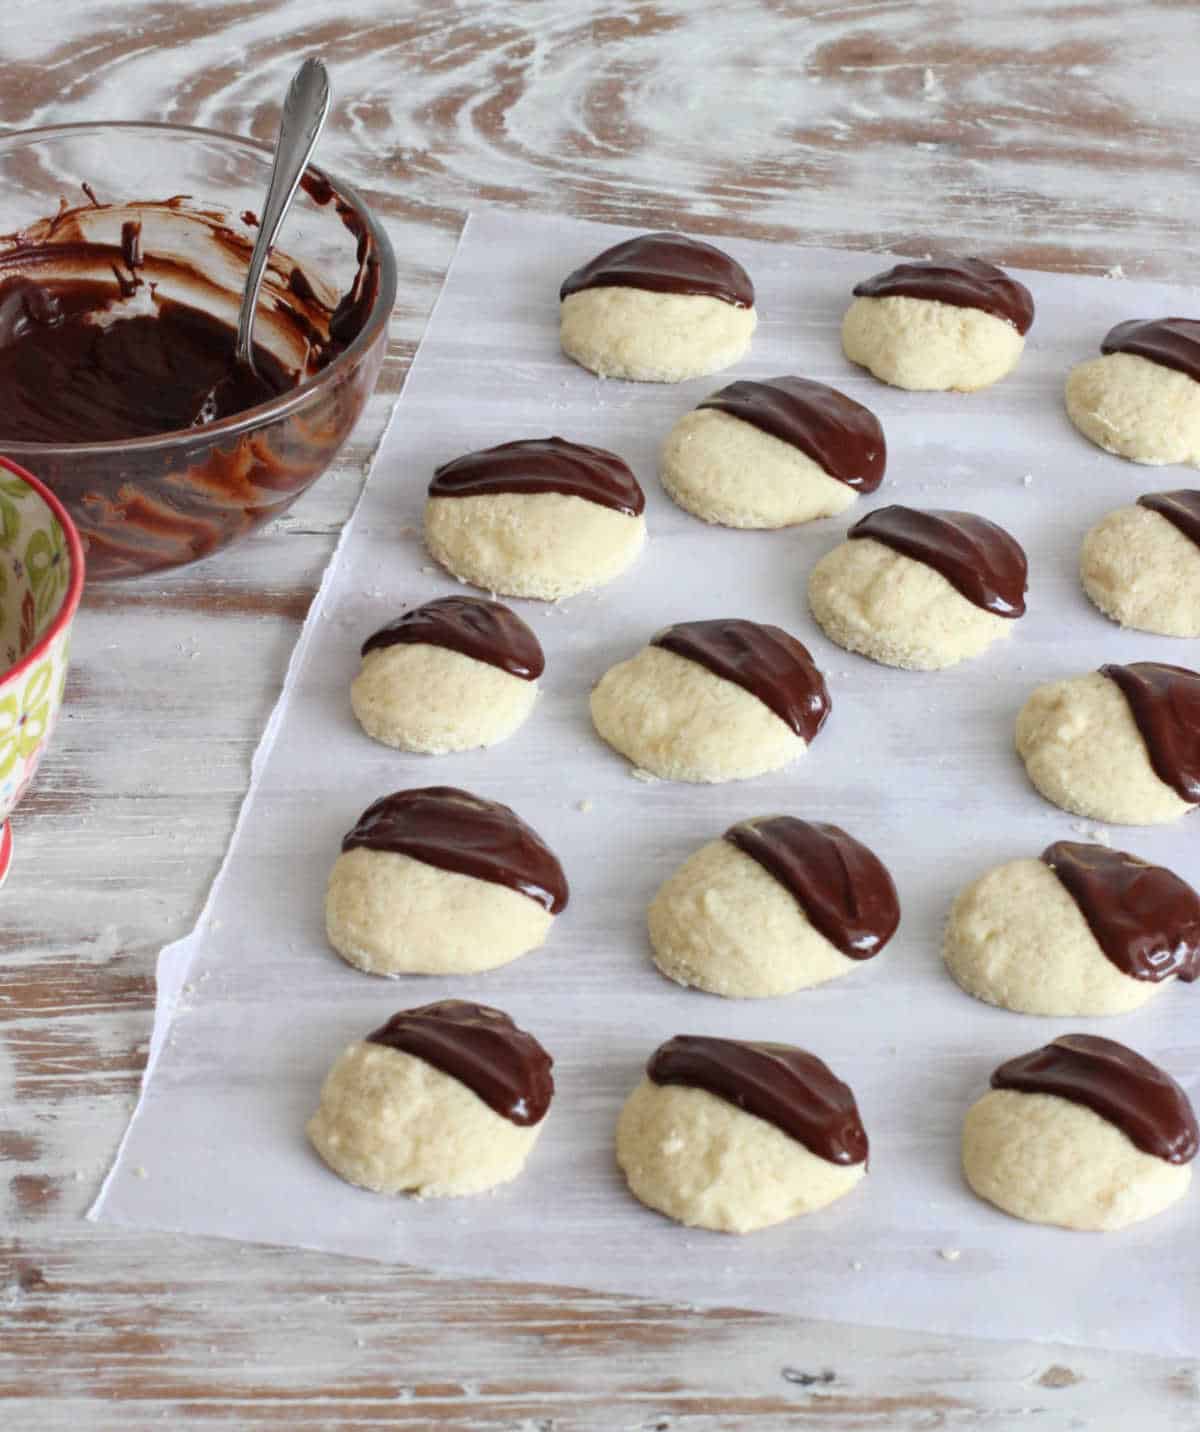 Half glazed vanilla cookies on parchment paper on a streaked white table. A bowl containing chocolate icing.